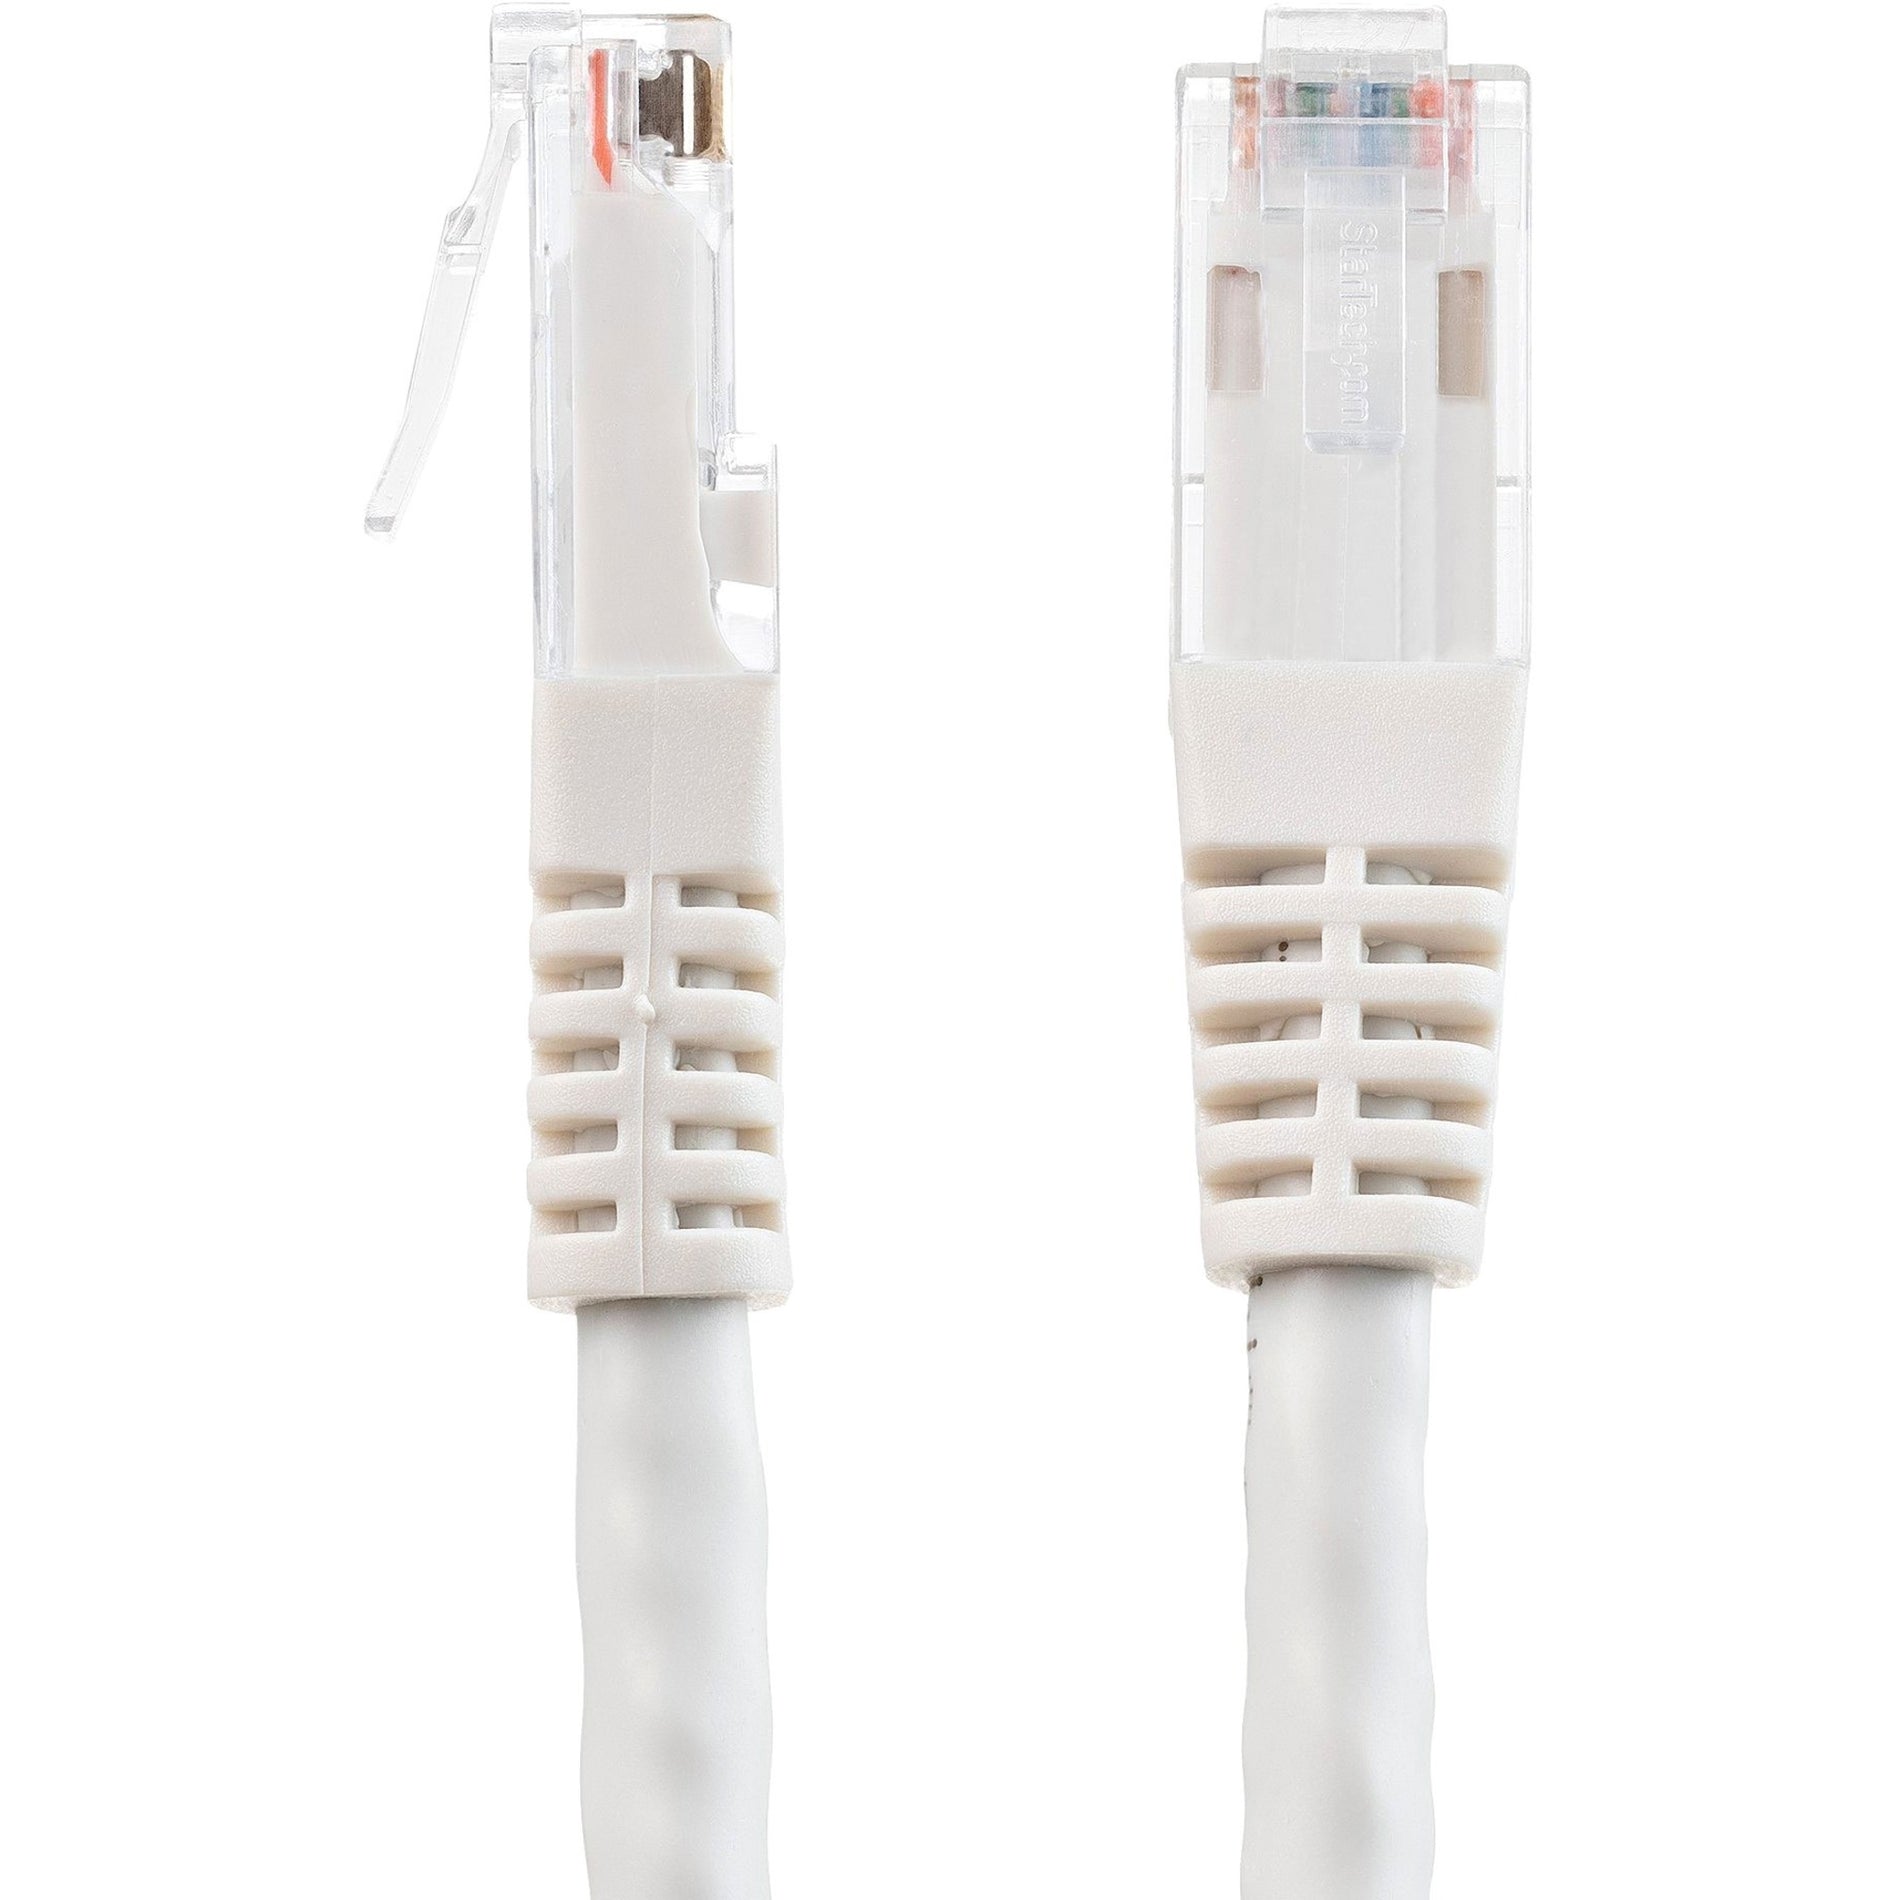 StarTech.com C6PATCH2WH 2ft White Cat6 UTP Patch Cable ETL Verified, 10 Gbit/s Data Transfer Rate, Gold Plated Connectors